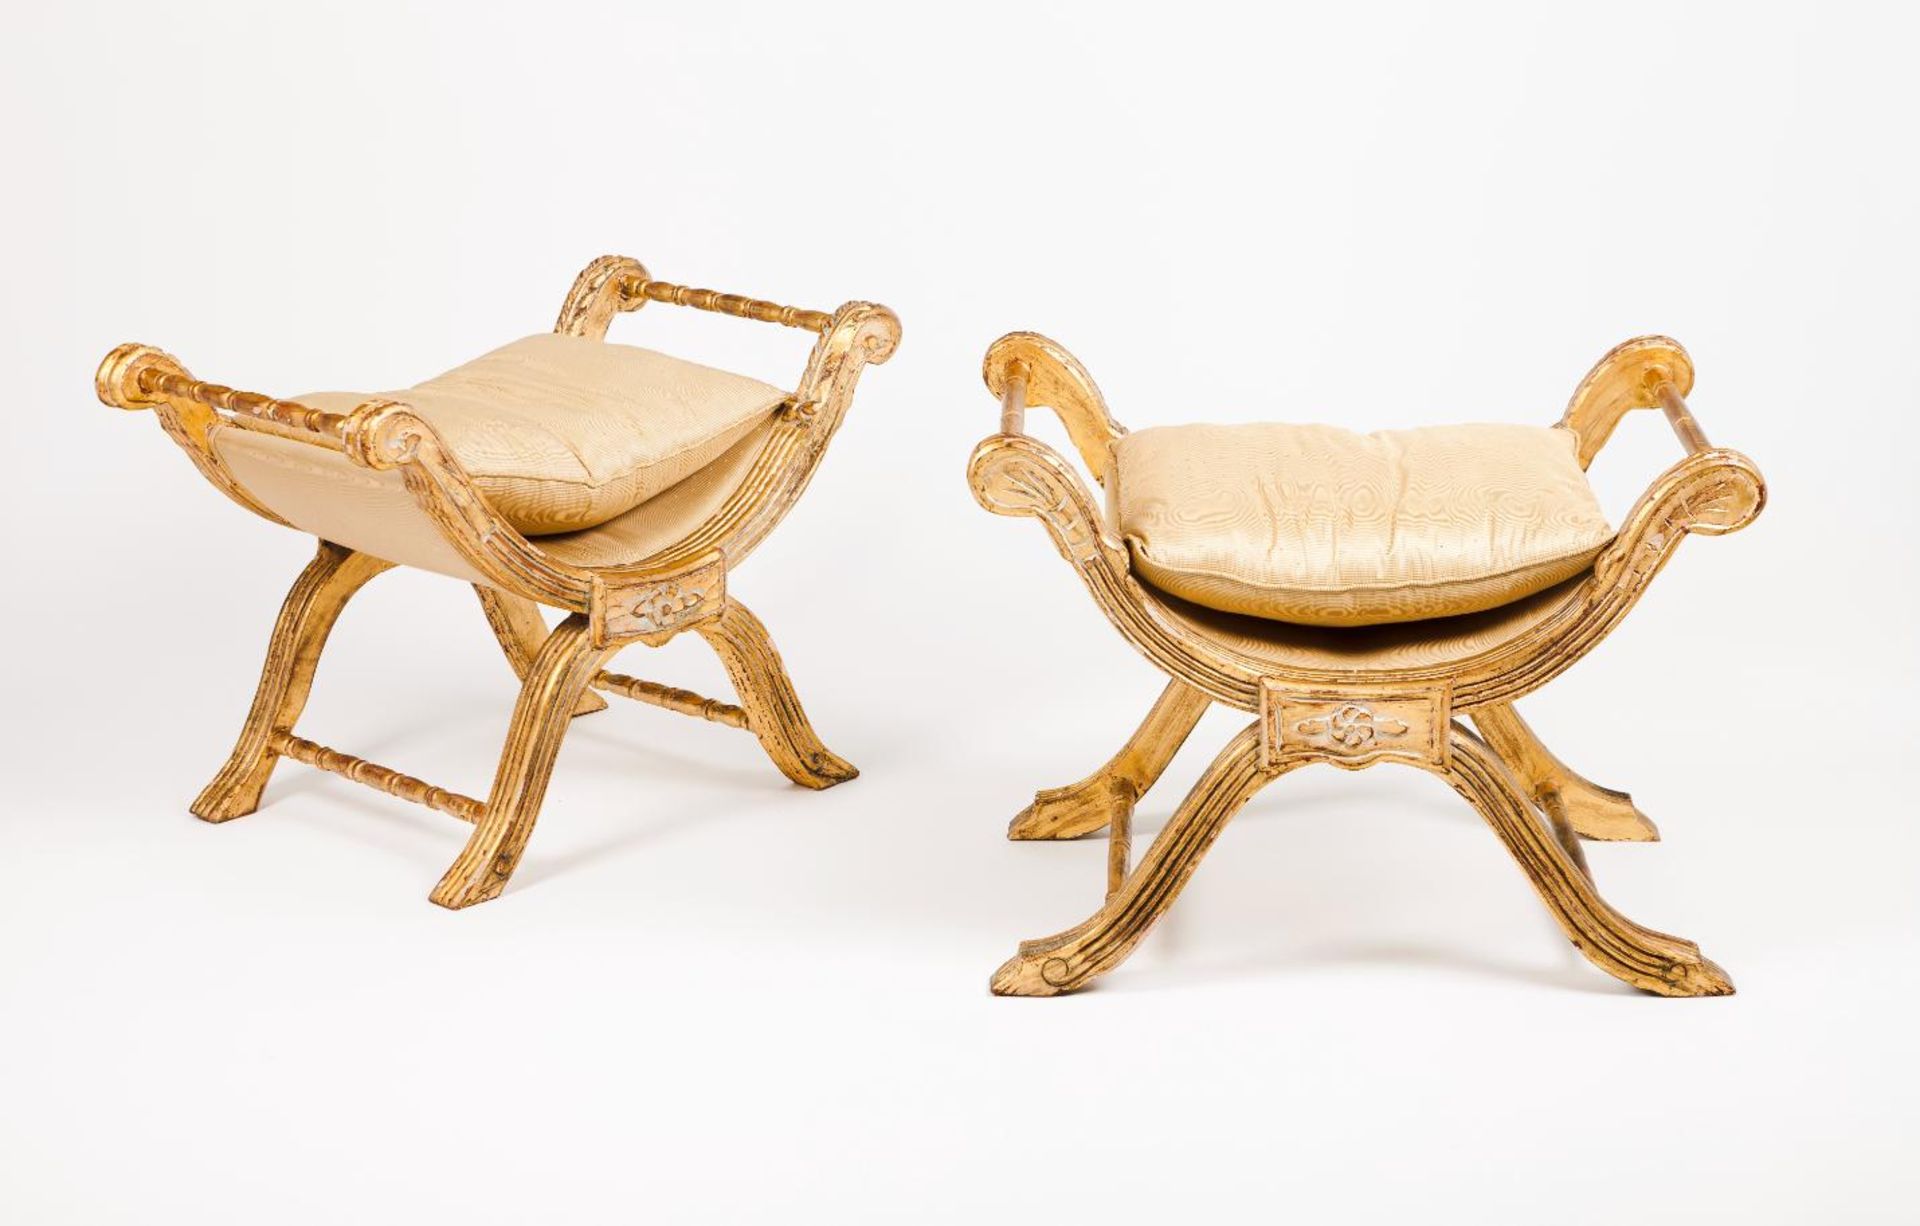 A set of two faldstools in the Neoclassical taste